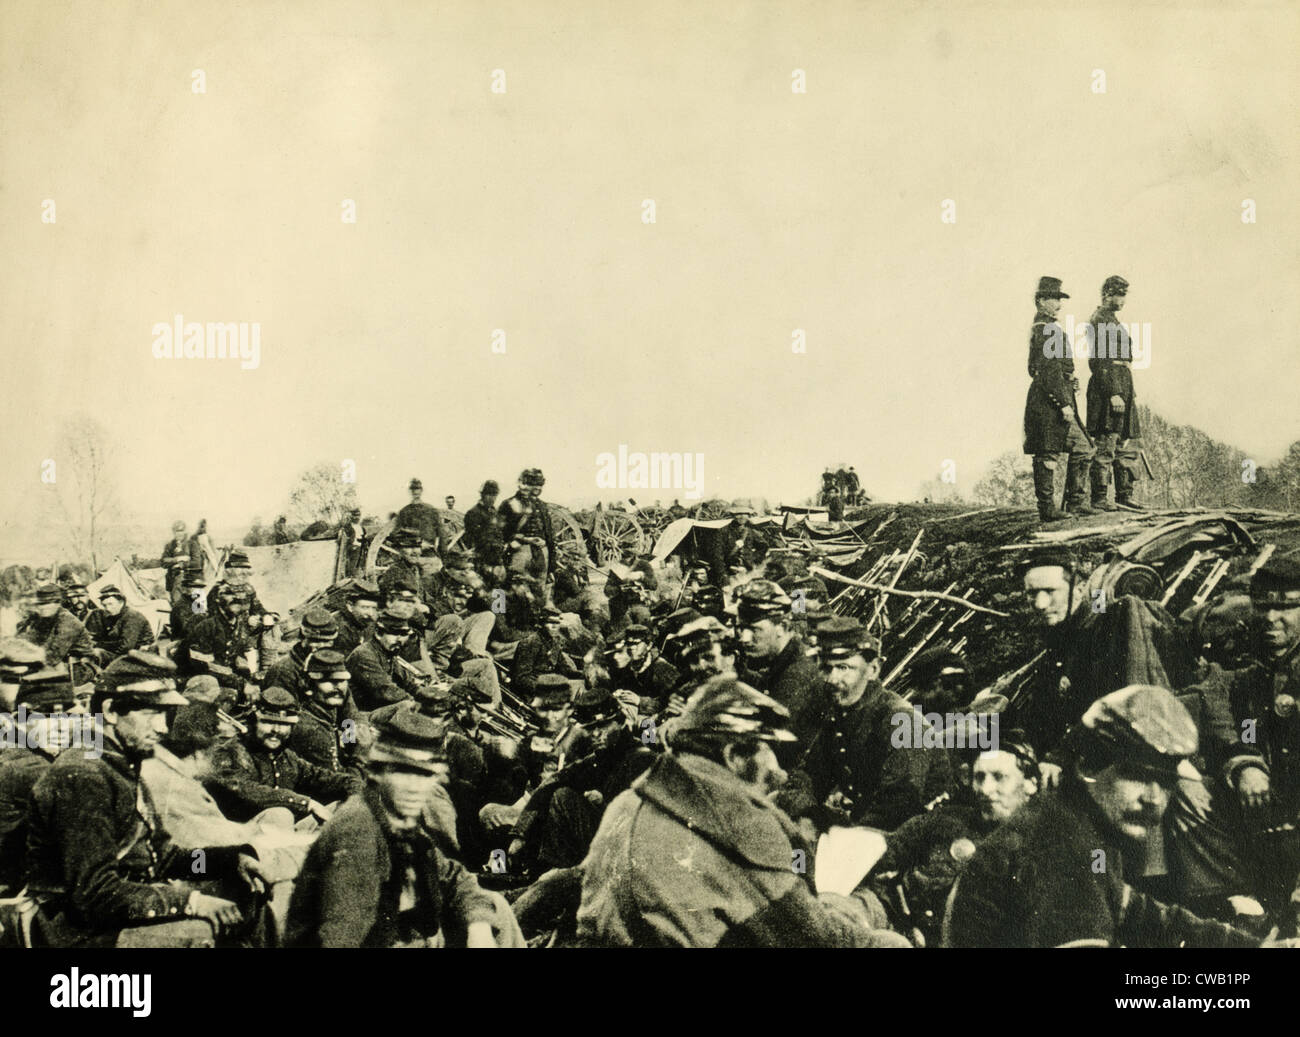 The Civil War, Union soldiers in Trenches before the Battle of Petersburg, Virginia, June 9, 1864. Stock Photo